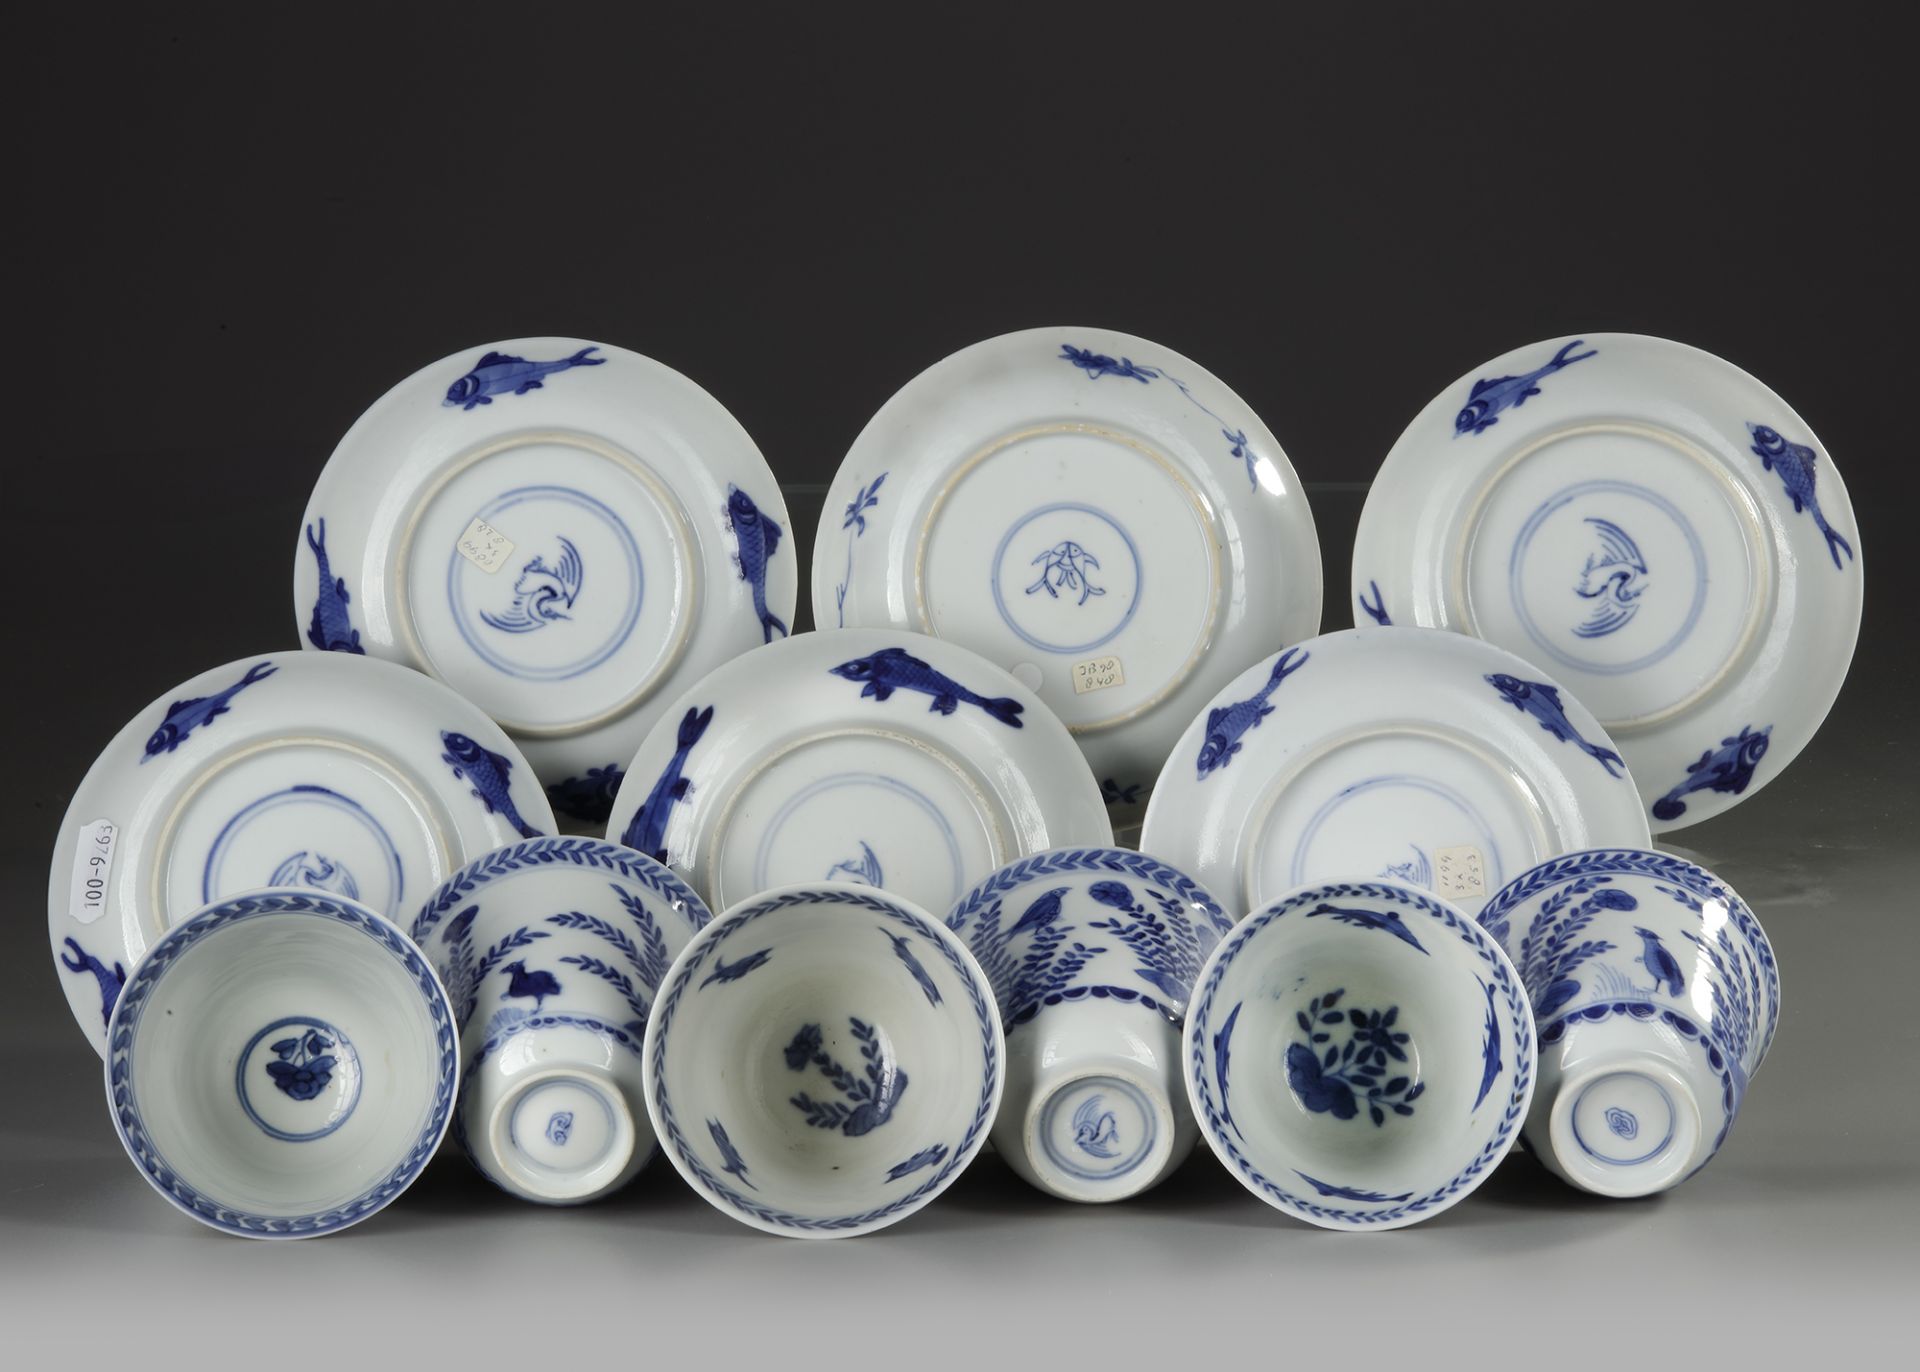 SIX CHINESE BLUE AND WHITE 'CUCKOO IN THE HOUSE' CUPS AND SAUCERS, 18TH CENTURY - Bild 3 aus 3